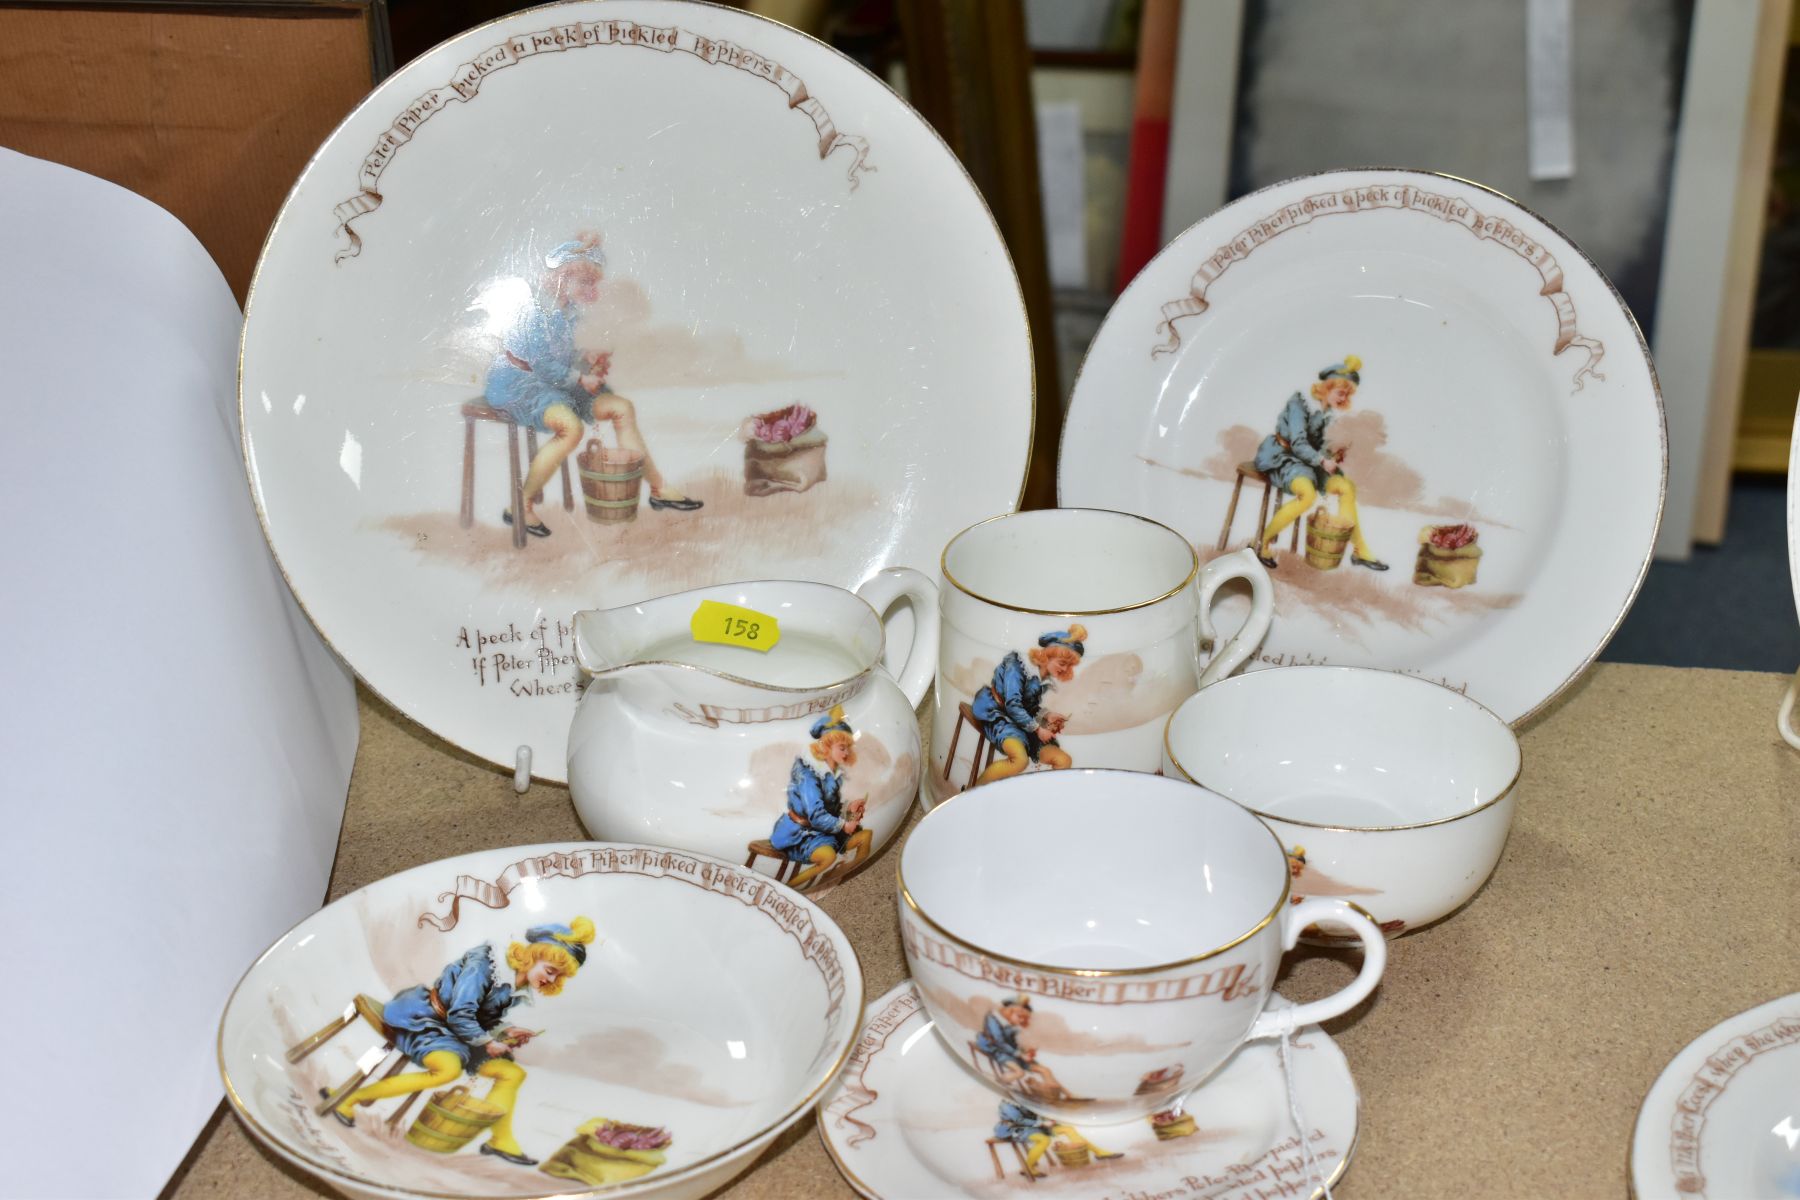 EIGHT PIECES OF ROYAL DOULTON NURSERY RHYMES 'A' SERIES WARE, DESIGNED BY WILLIAM SAVAGE COOPER, '